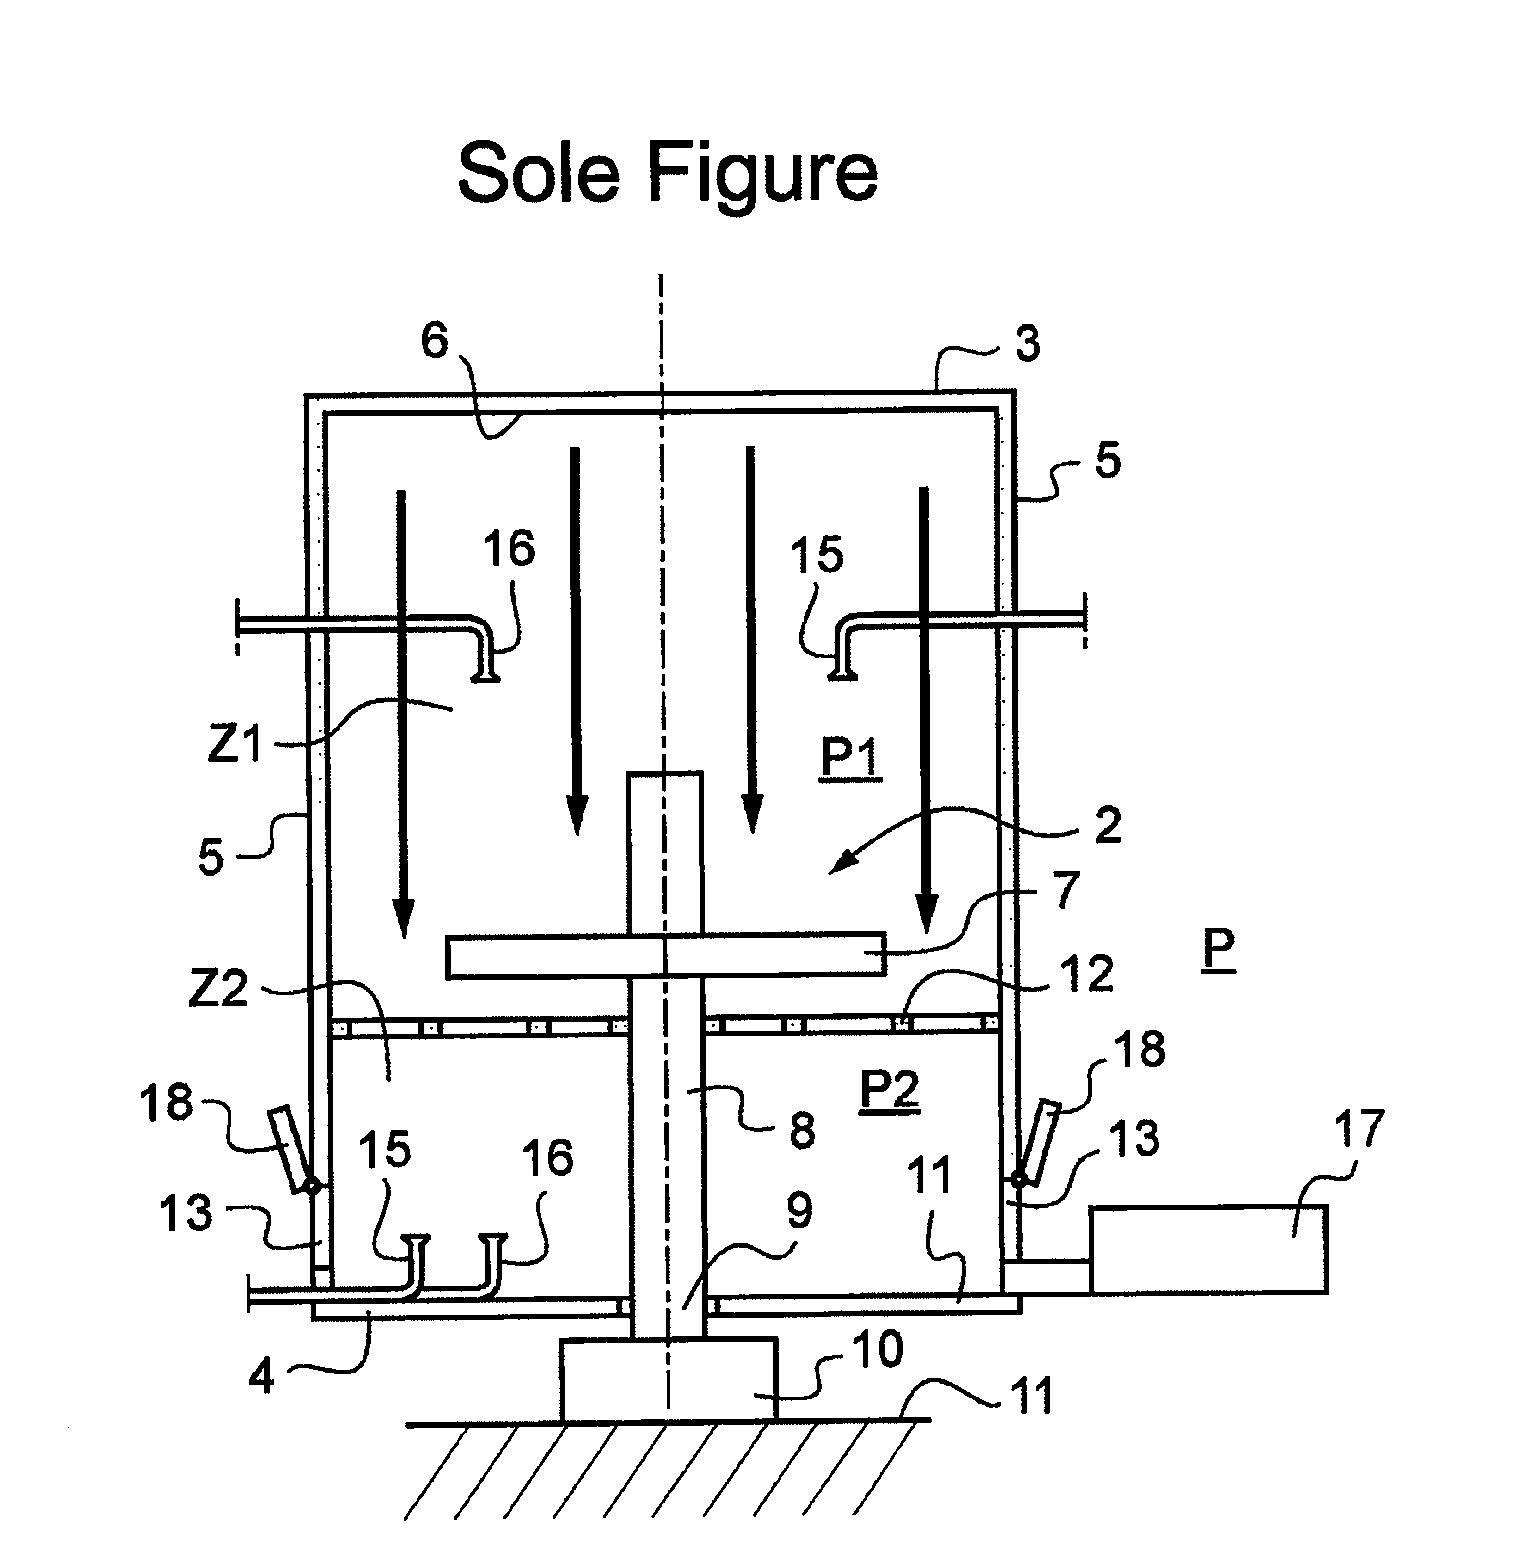 Aseptic packaging installation having aseptic buffer zones